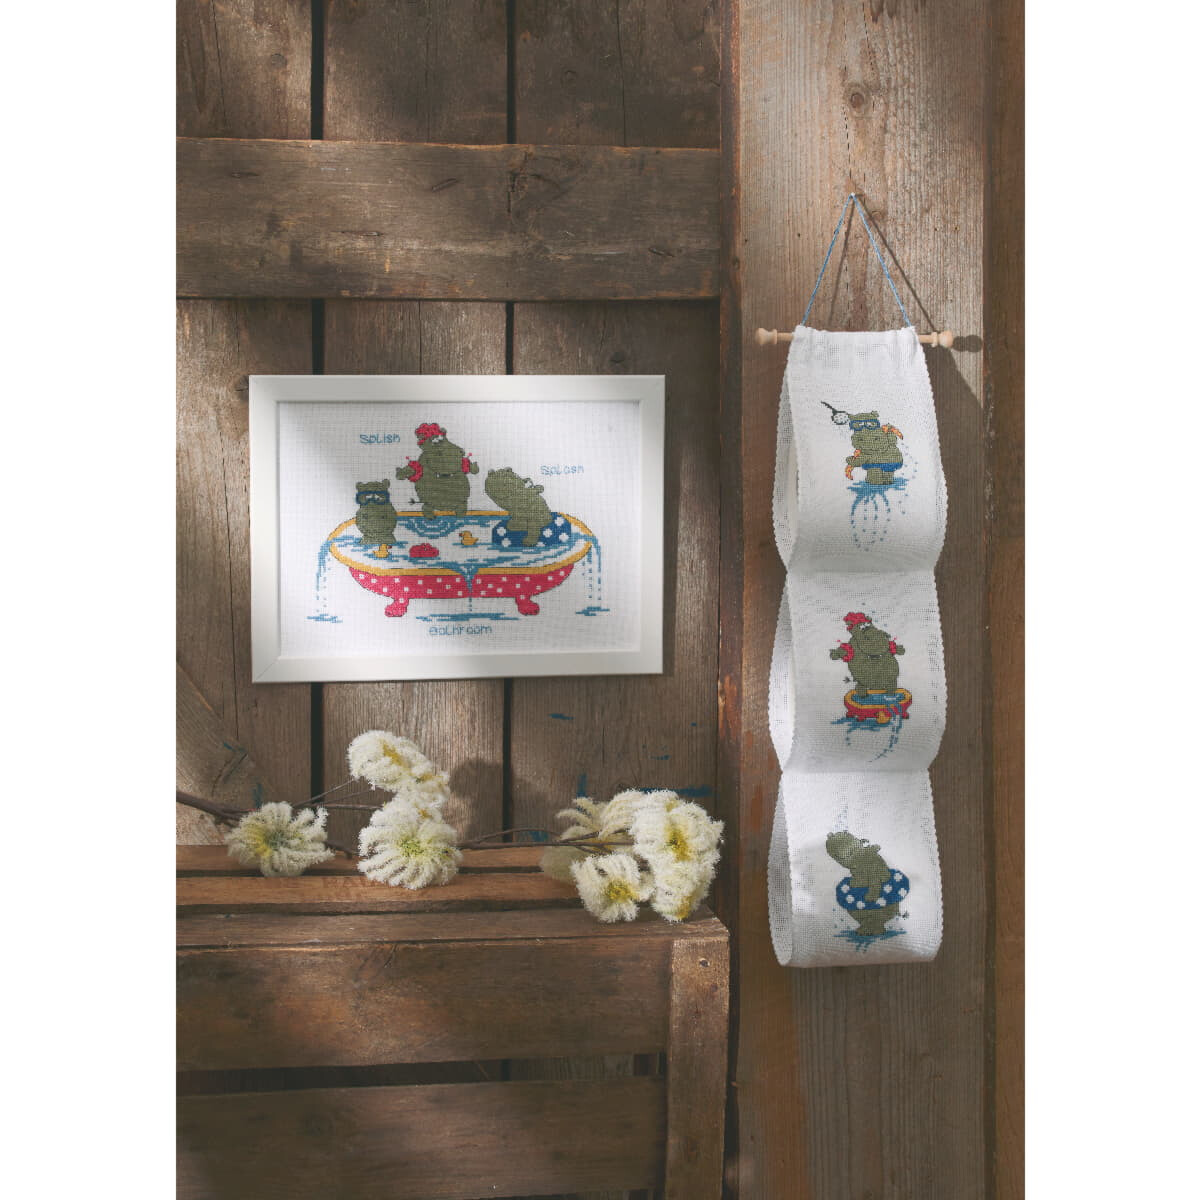 Permin counted cross stitch kit "Toilet paper holder...